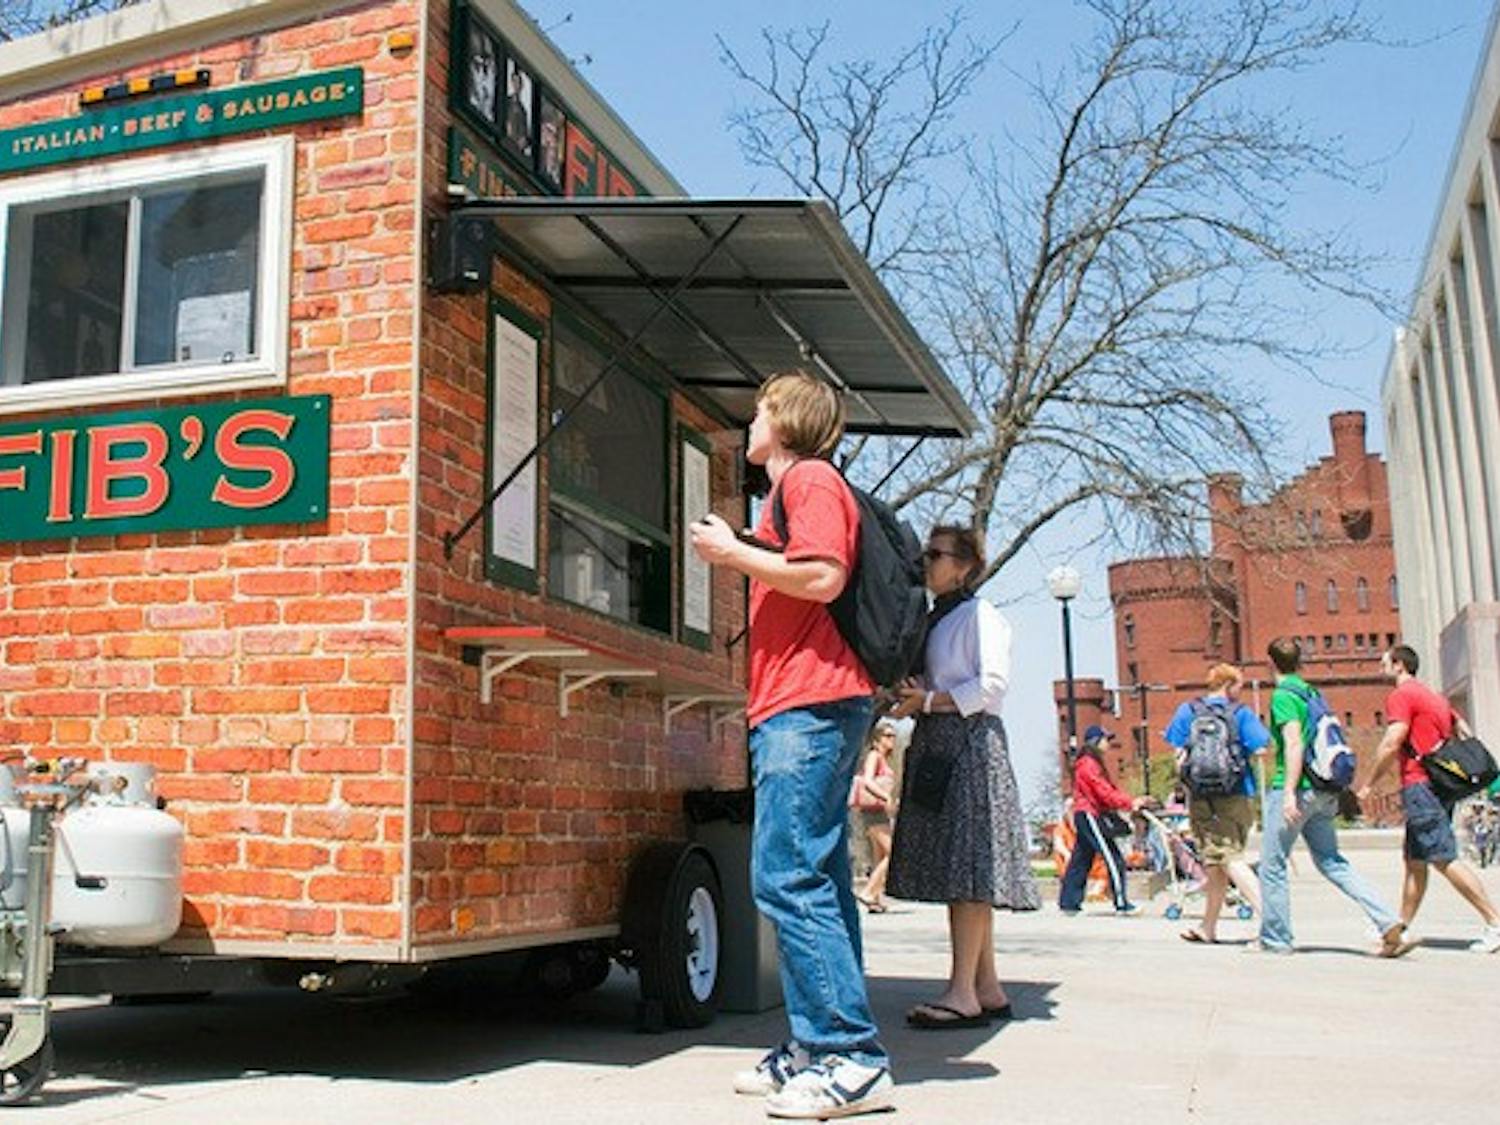 Library Mall hosts cheap, new food carts